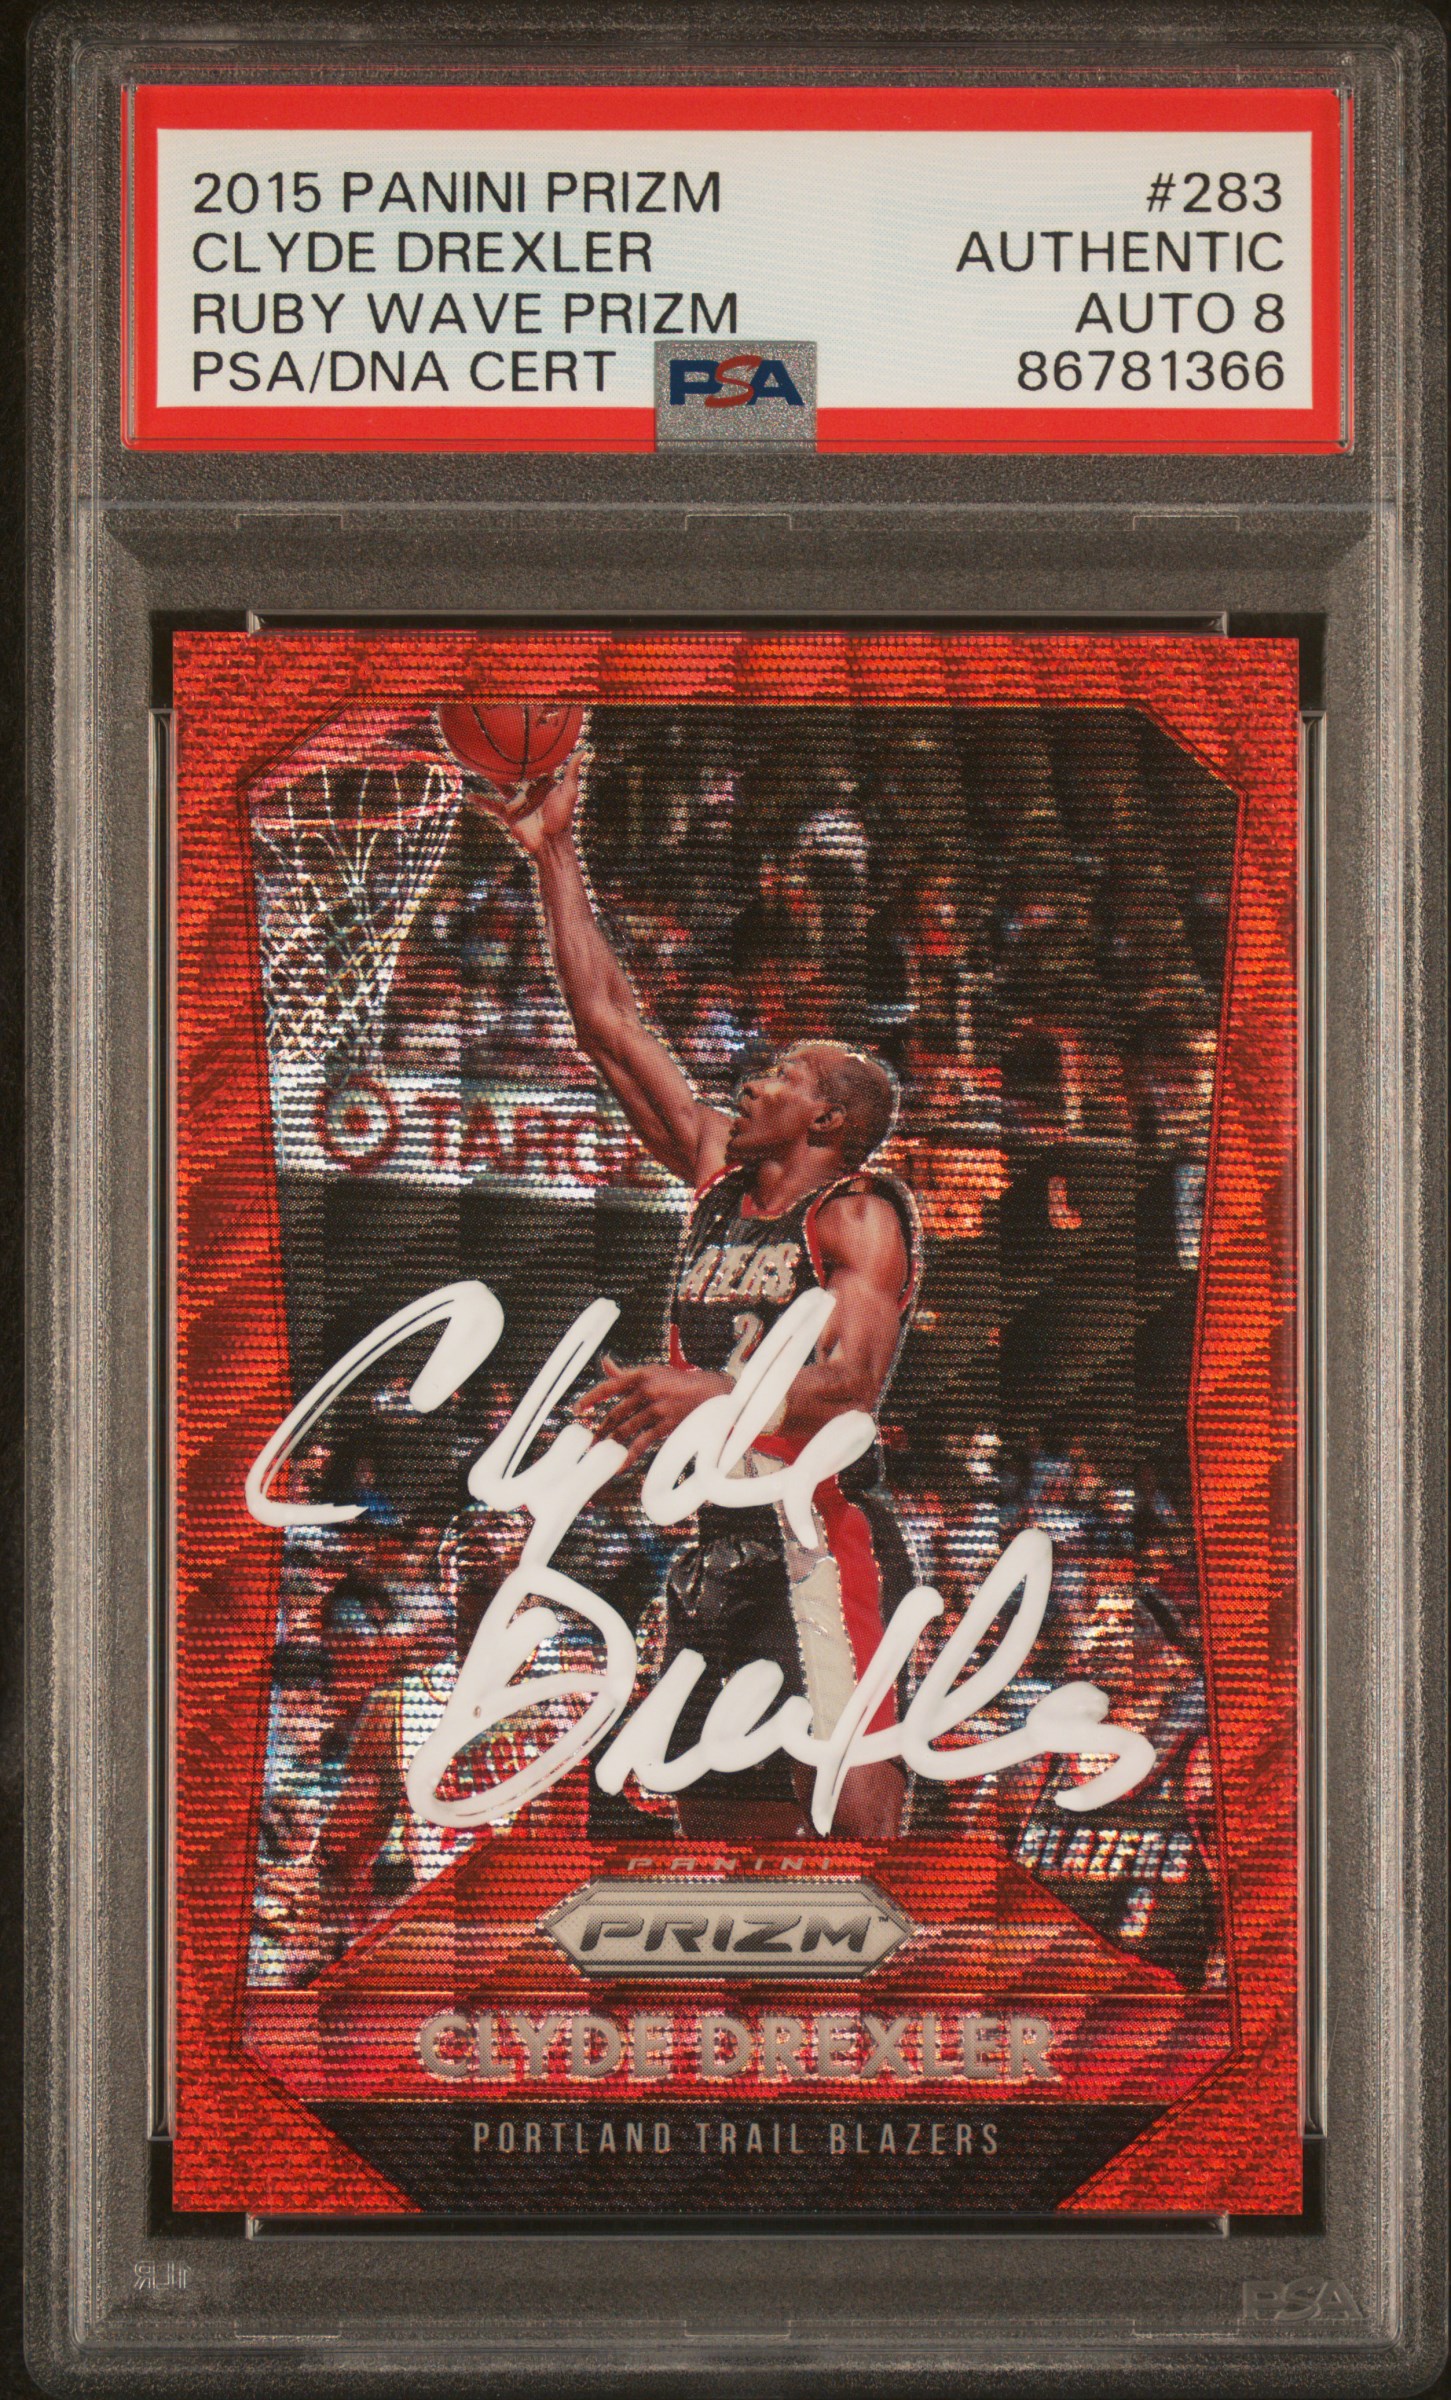 Clyde Drexler 2015 Panini Prizm Ruby Wave Red Card #283 Auto PSA 8 213/350